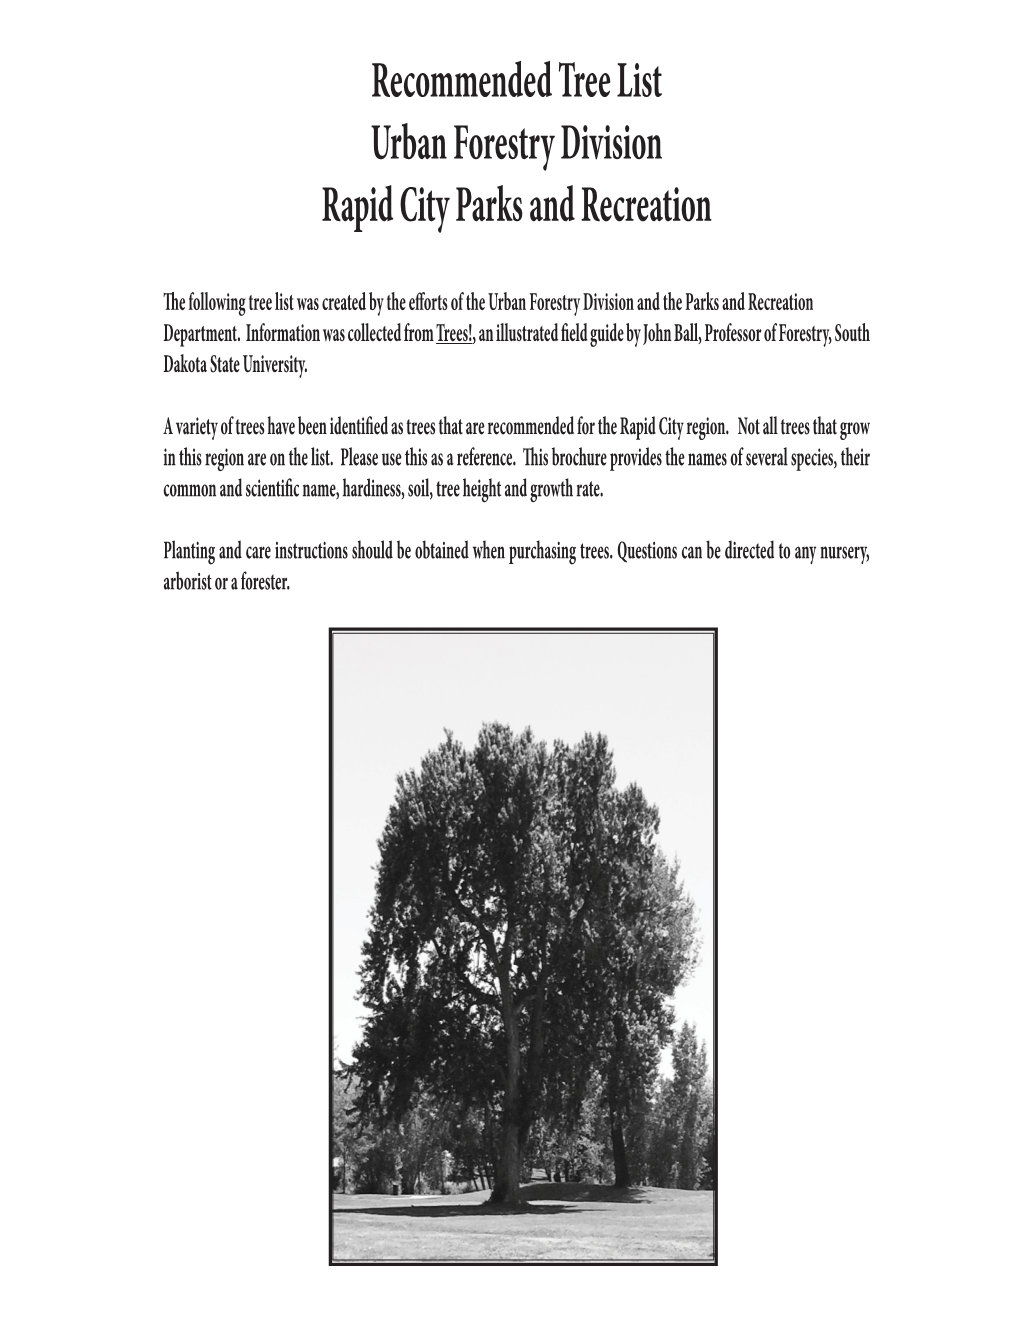 Recommended Tree List Urban Forestry Division Rapid City Parks and Recreation